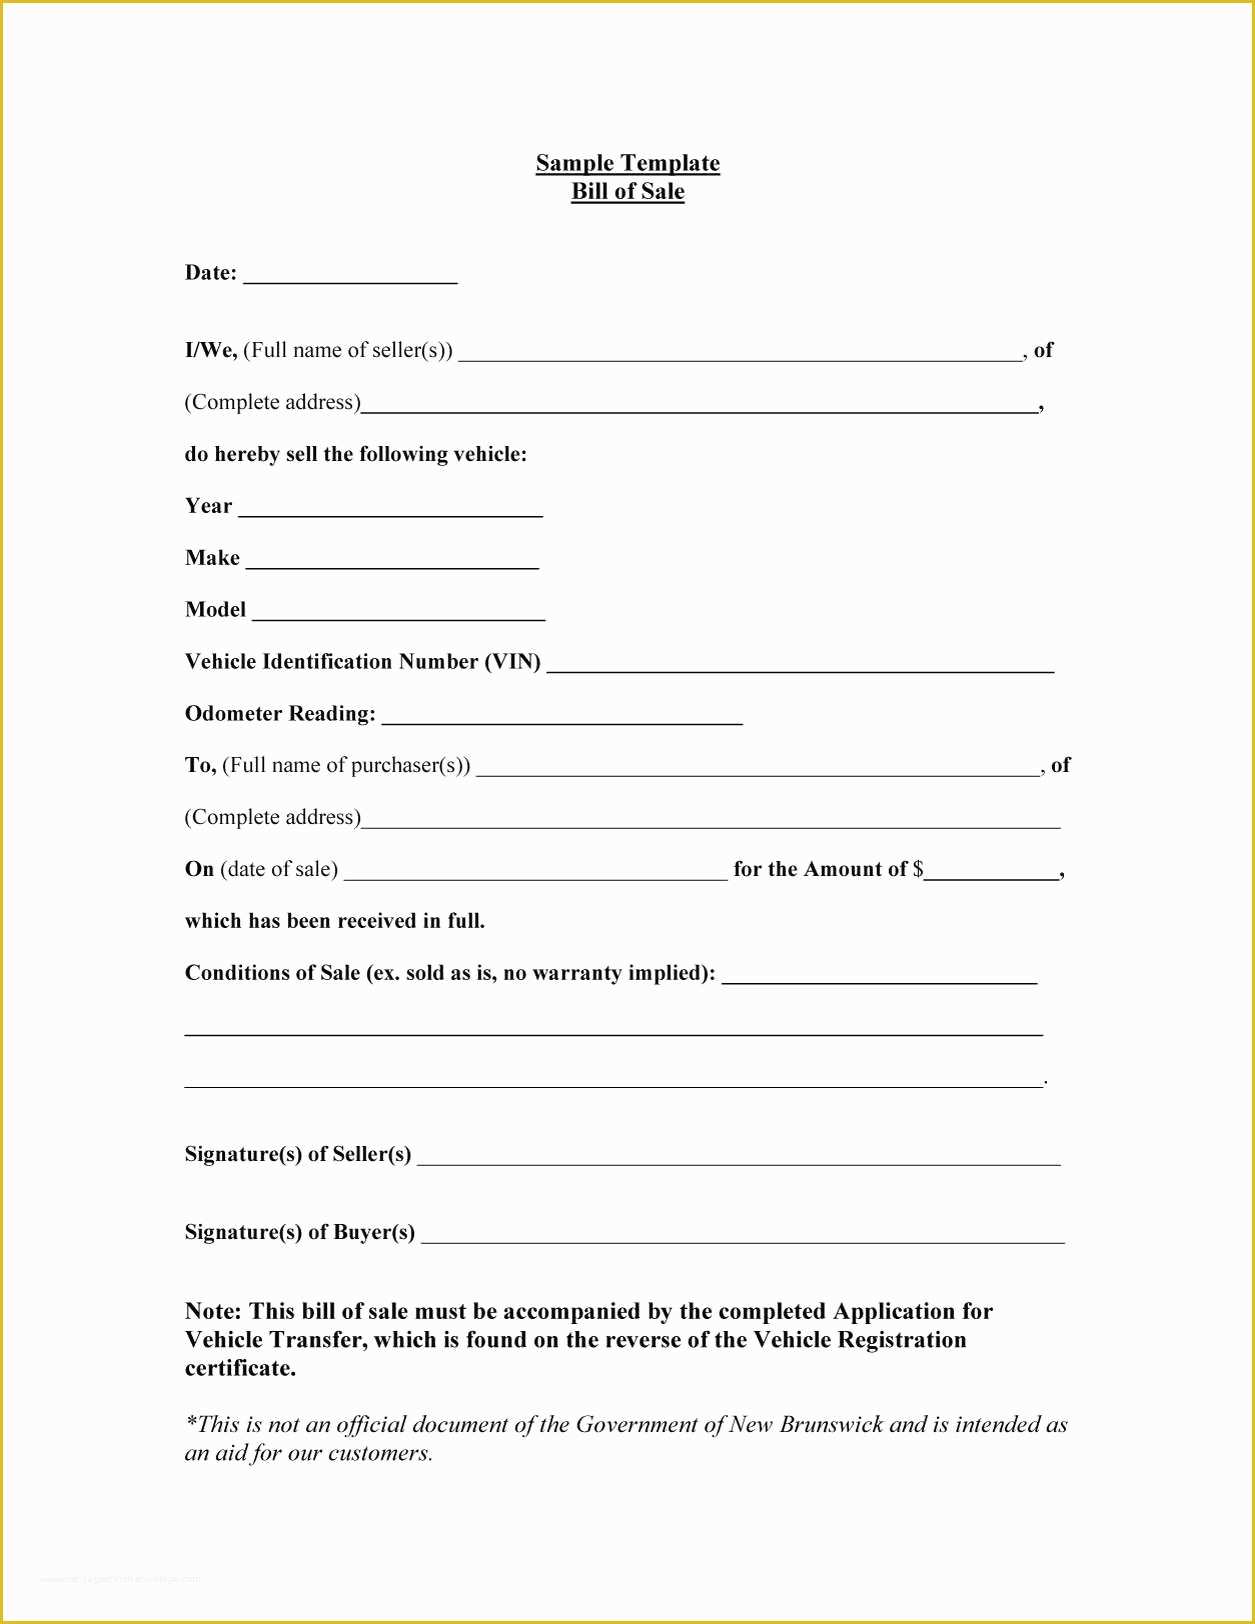 Free Vehicle Bill Of Sale Template Of 46 Fee Printable Bill Of Sale Templates Car Boat Gun